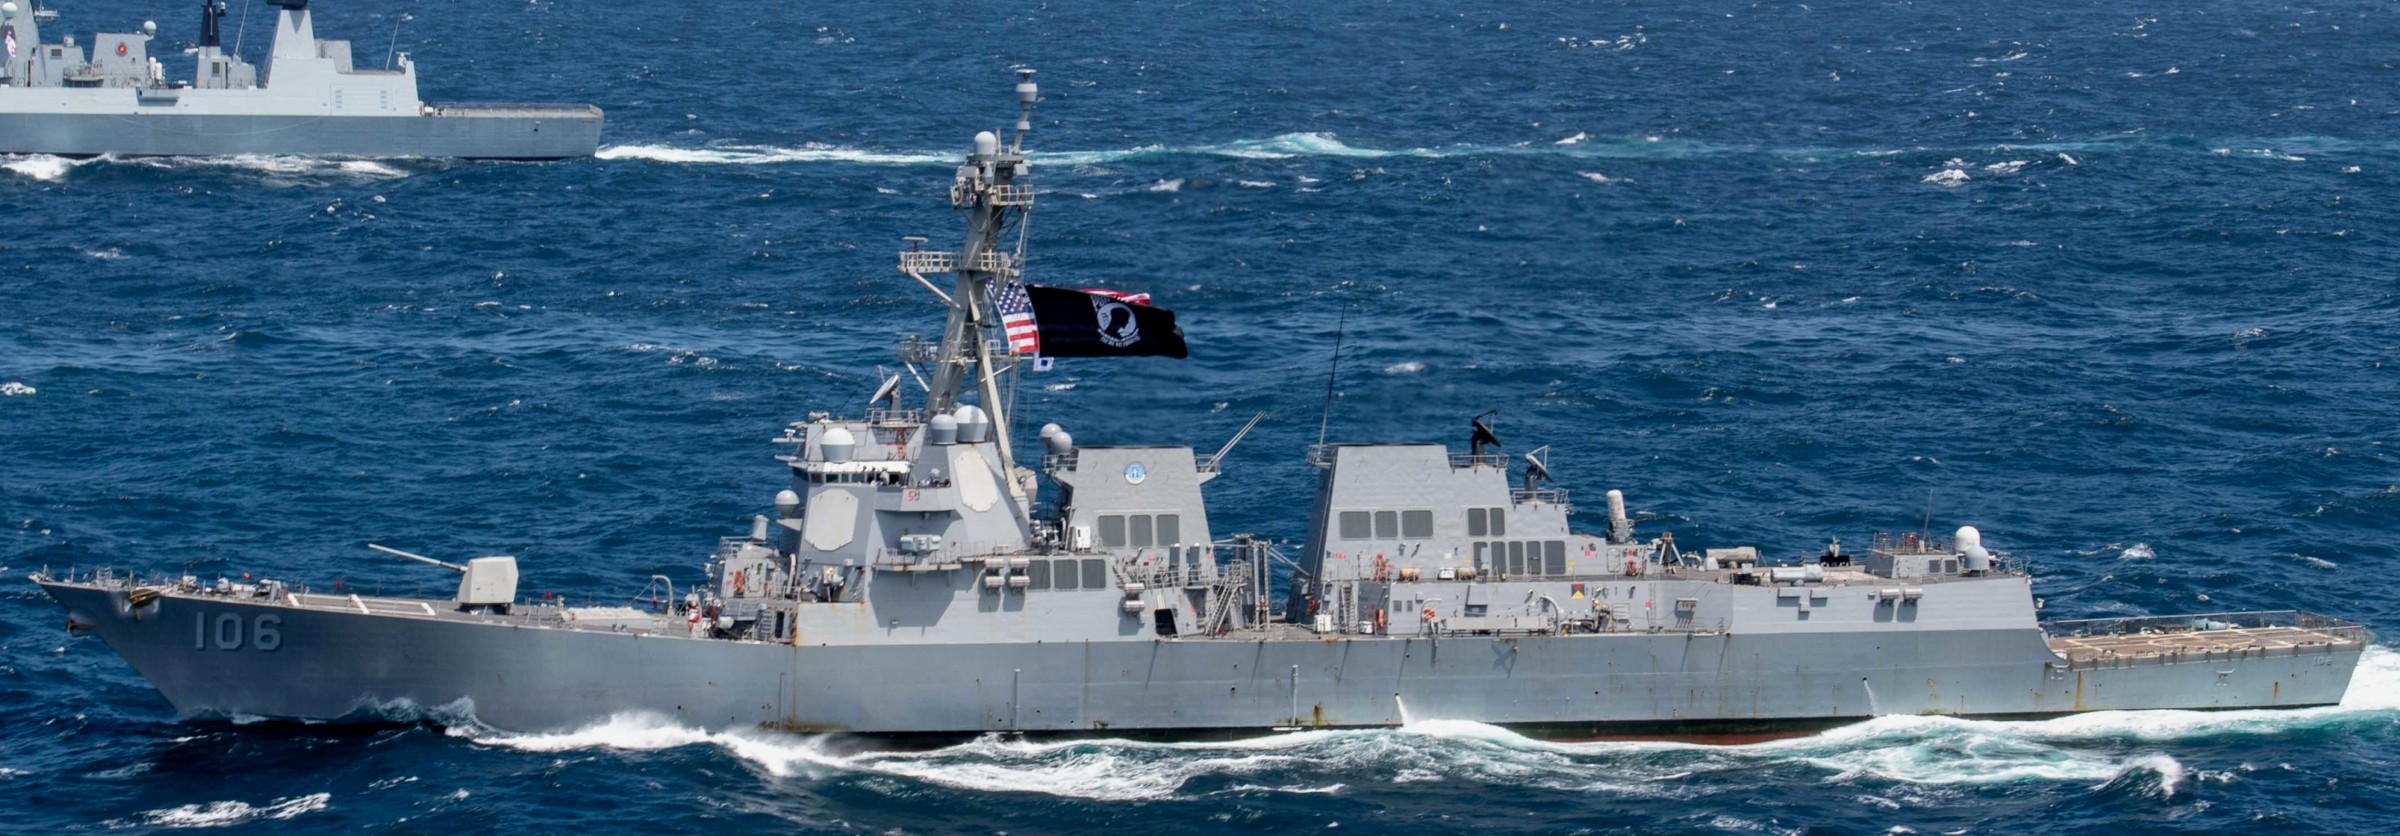 ddg-106 uss stockdale arleigh burke class guided missile destroyer aegis us navy bay of bengal 147